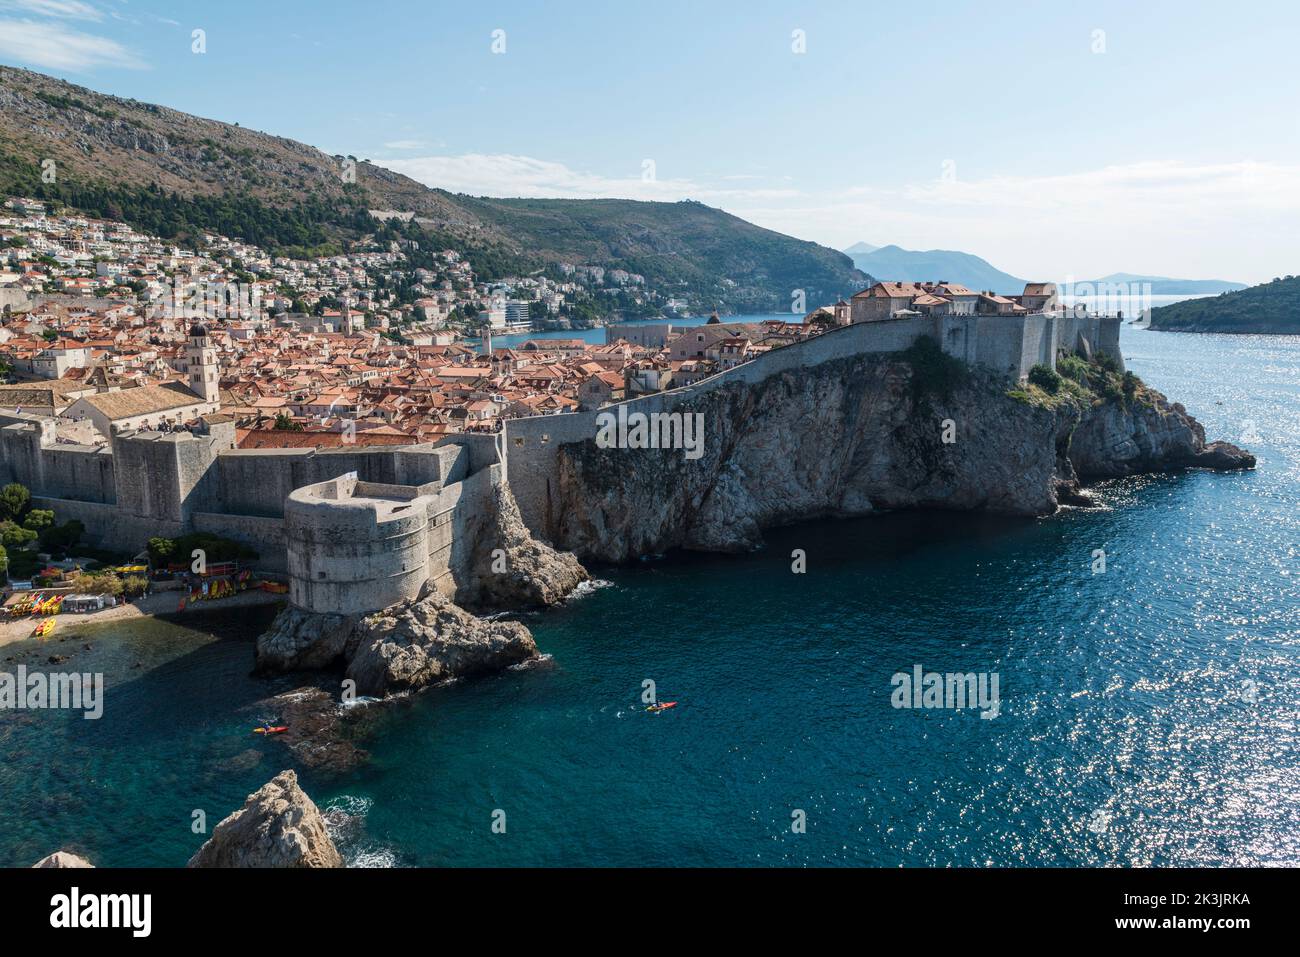 Overview of the old town of Dubrovnik, Croatia. Stock Photo